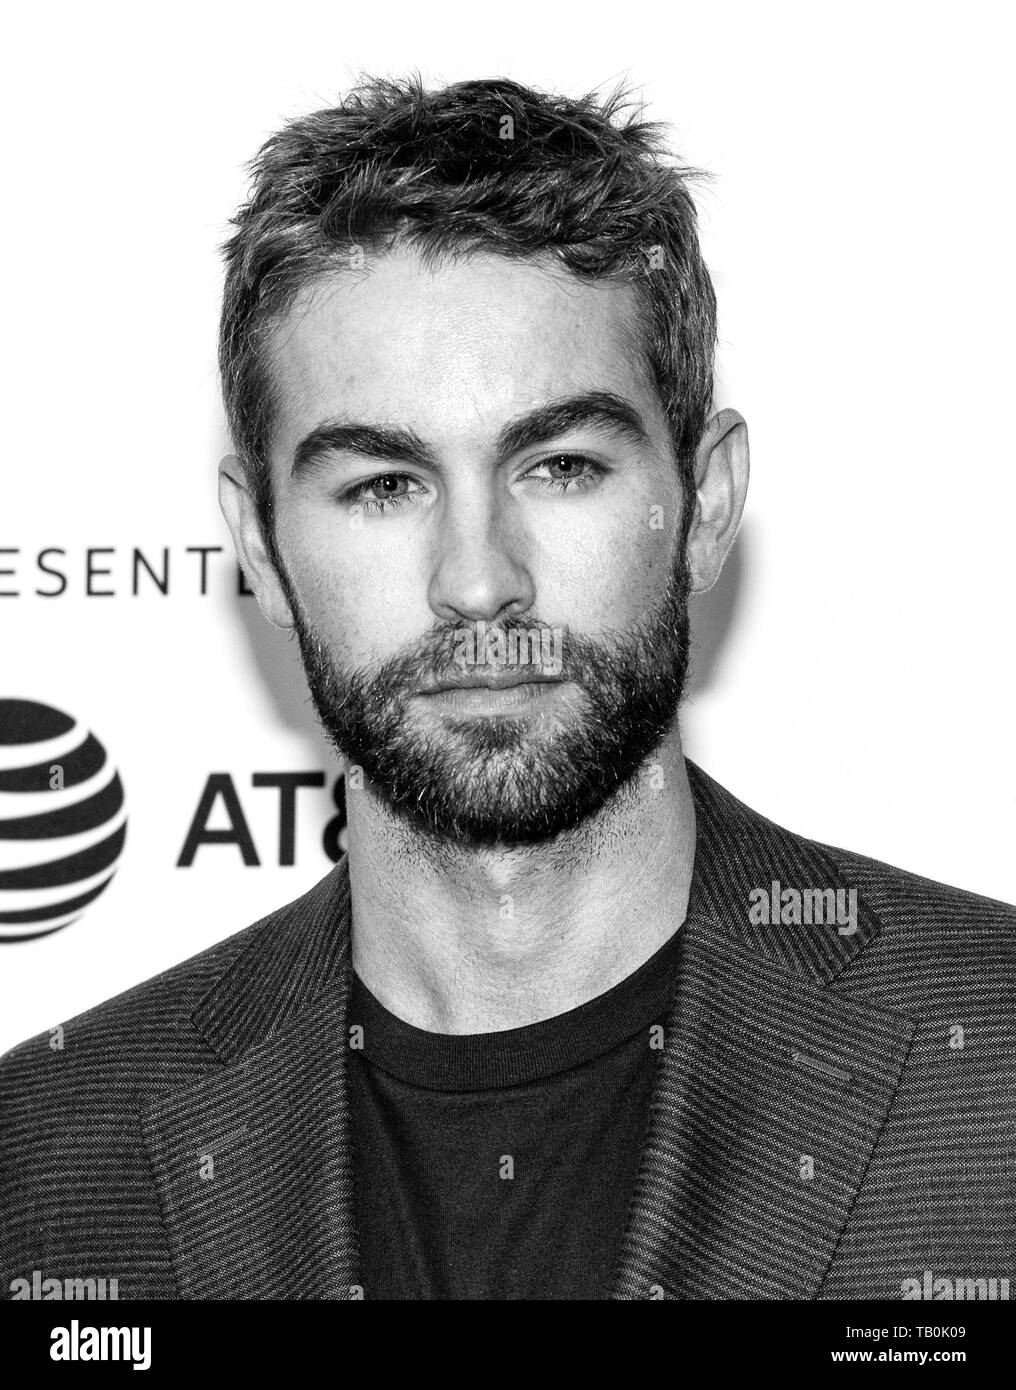 New York, NY - April 29, 2019: Chace Crawford attends the “The Boys” screening during the 2019 Tribeca Film Festival at SVA Theater Stock Photo